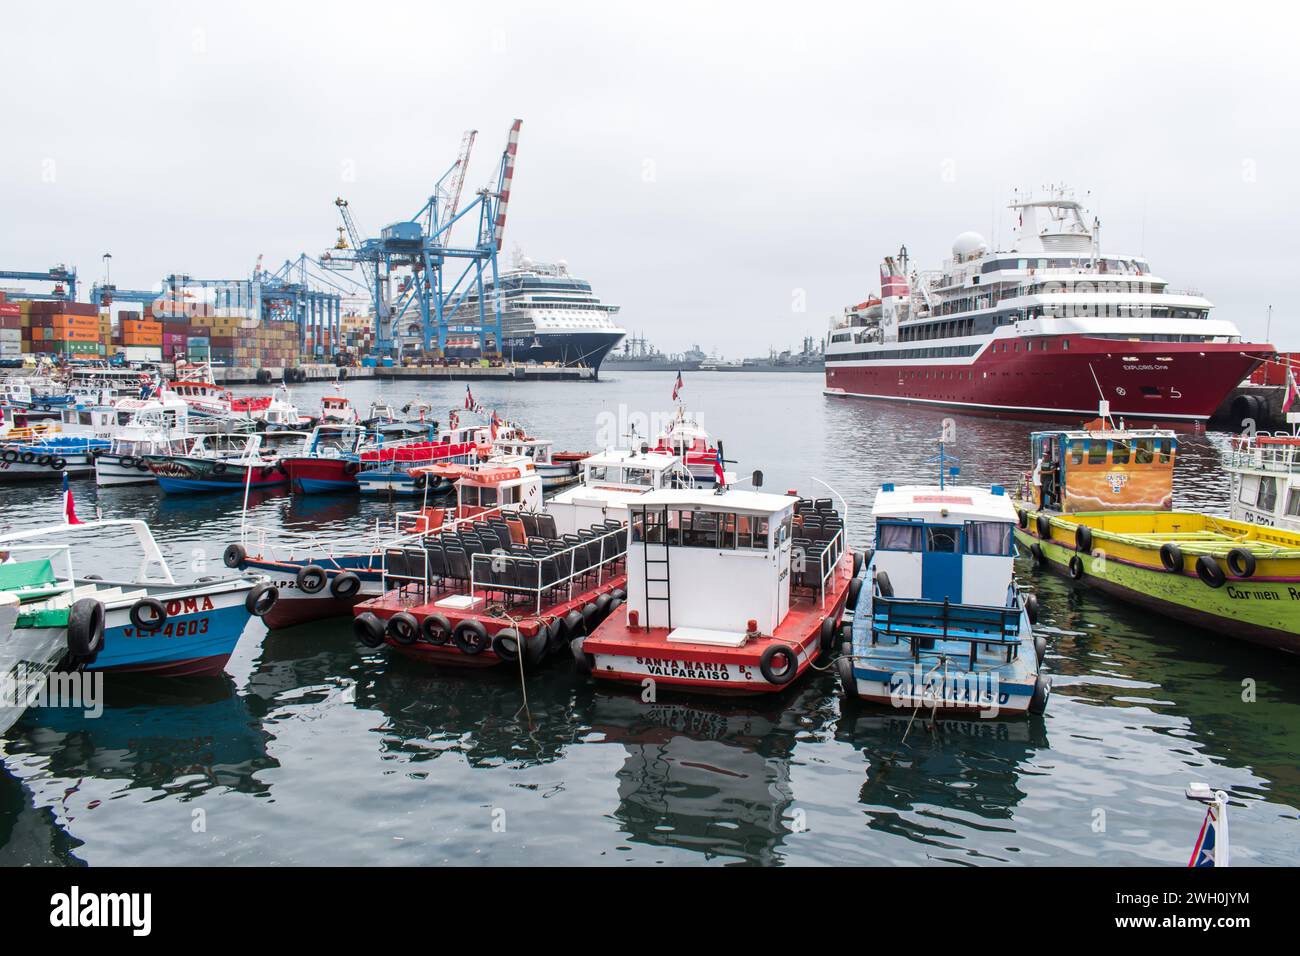 The Port of Valparaíso, located in the city of the same name in Chile's Valparaíso Region, is one of the country's main container terminals. Stock Photo